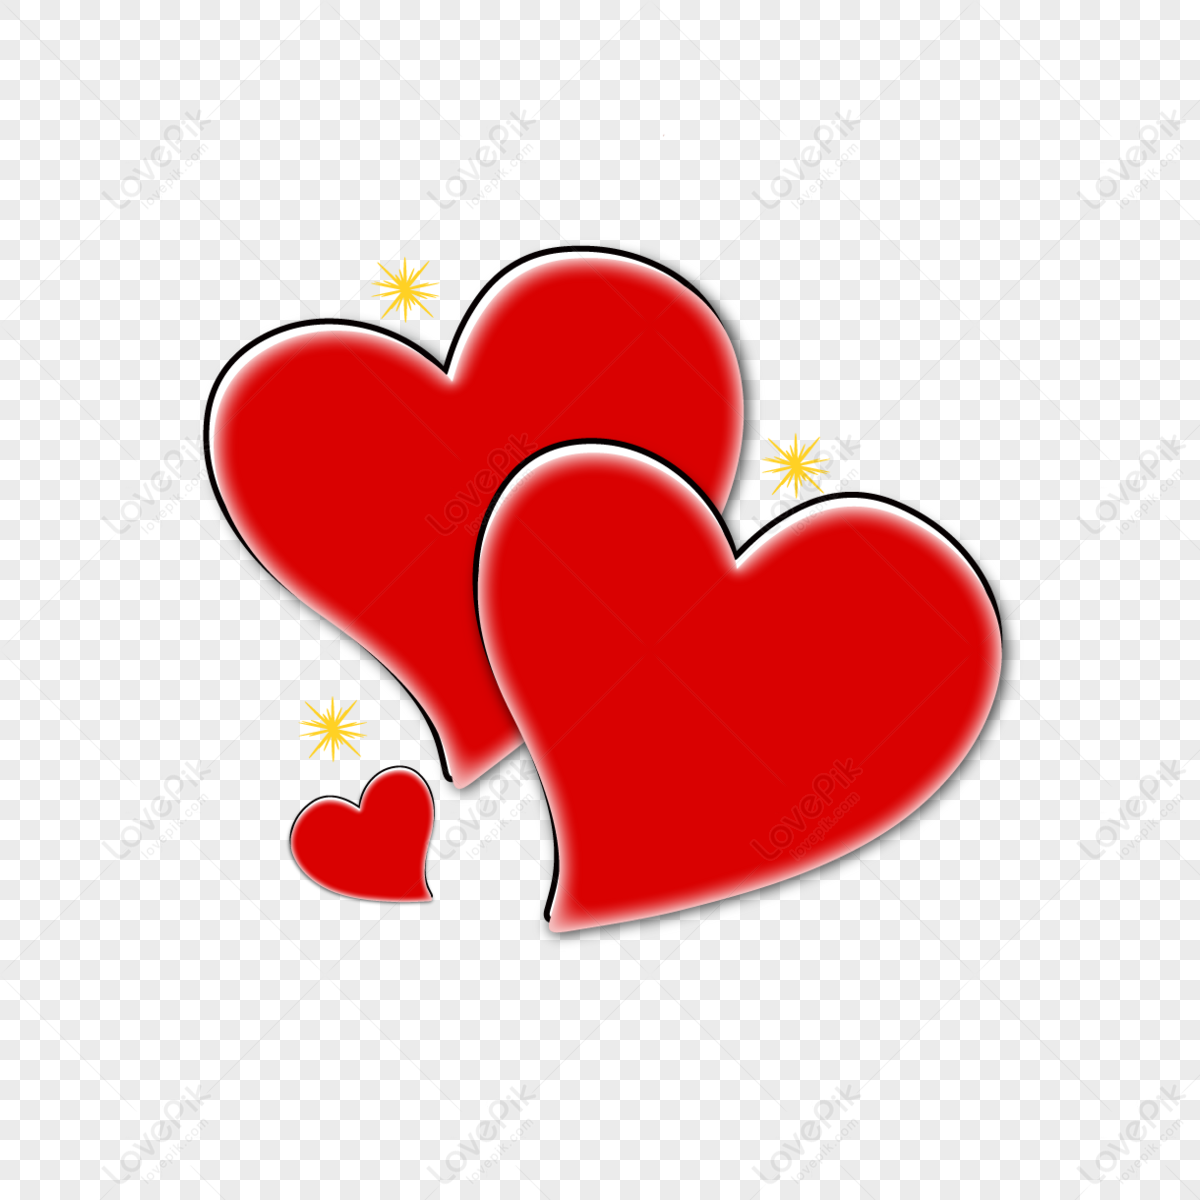 Heart PNG Images With Transparent Background